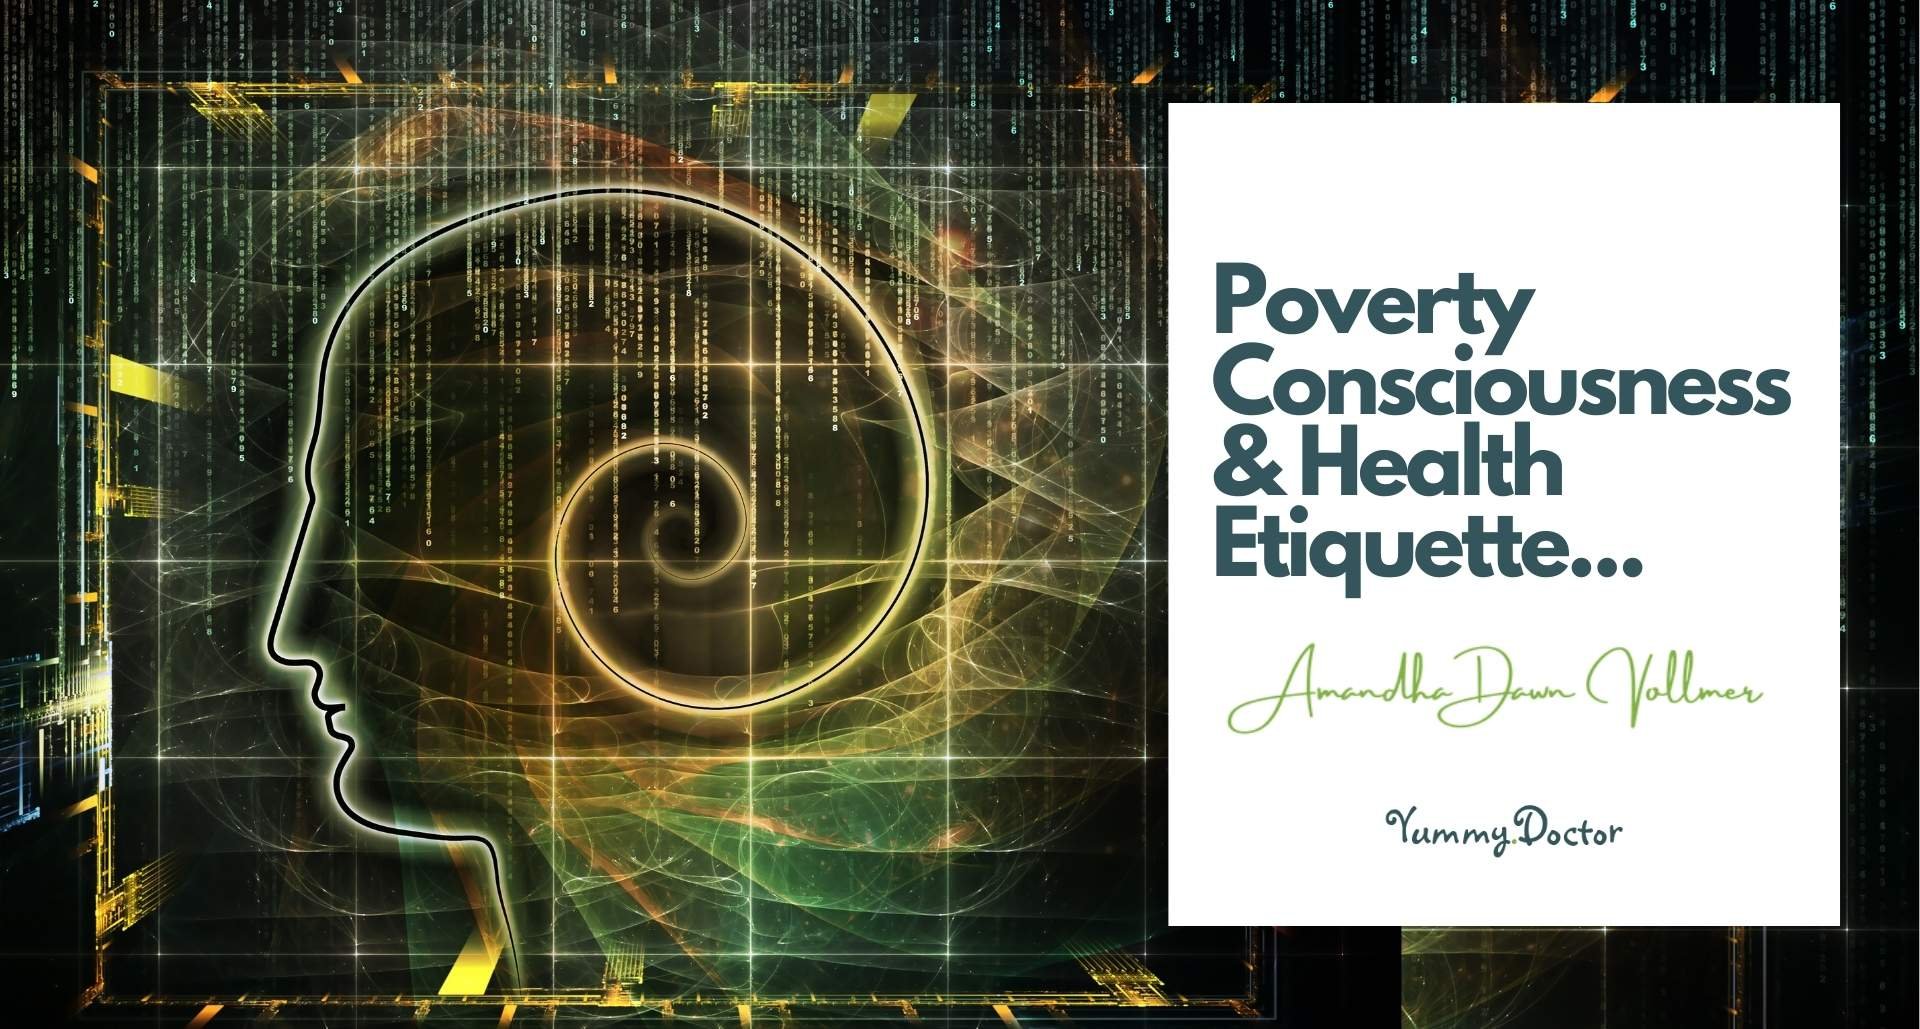 Poverty Consciousness and Health Etiquette by Amandha Vollmer (ADV)